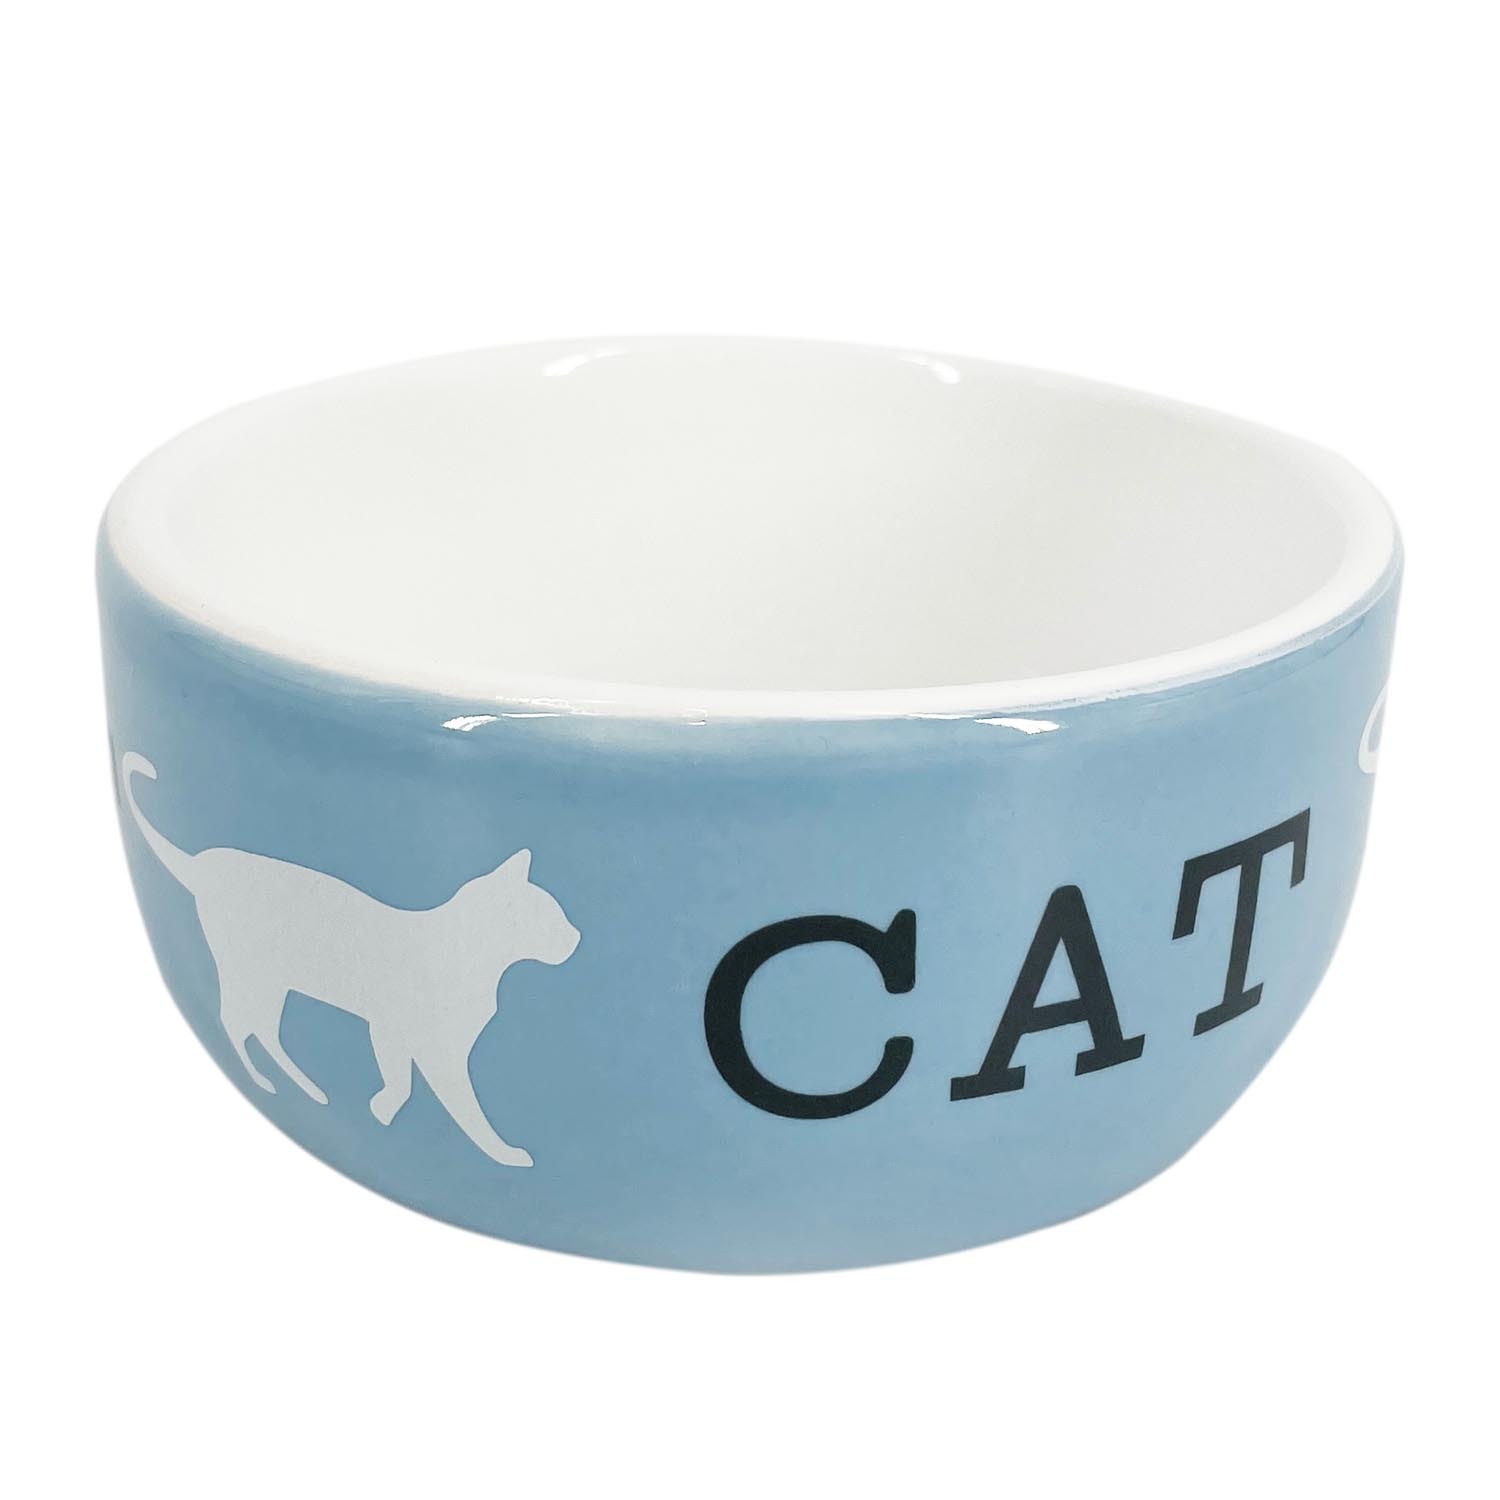 Single Clever Paws Cat Bowl in Assorted styles Image 2